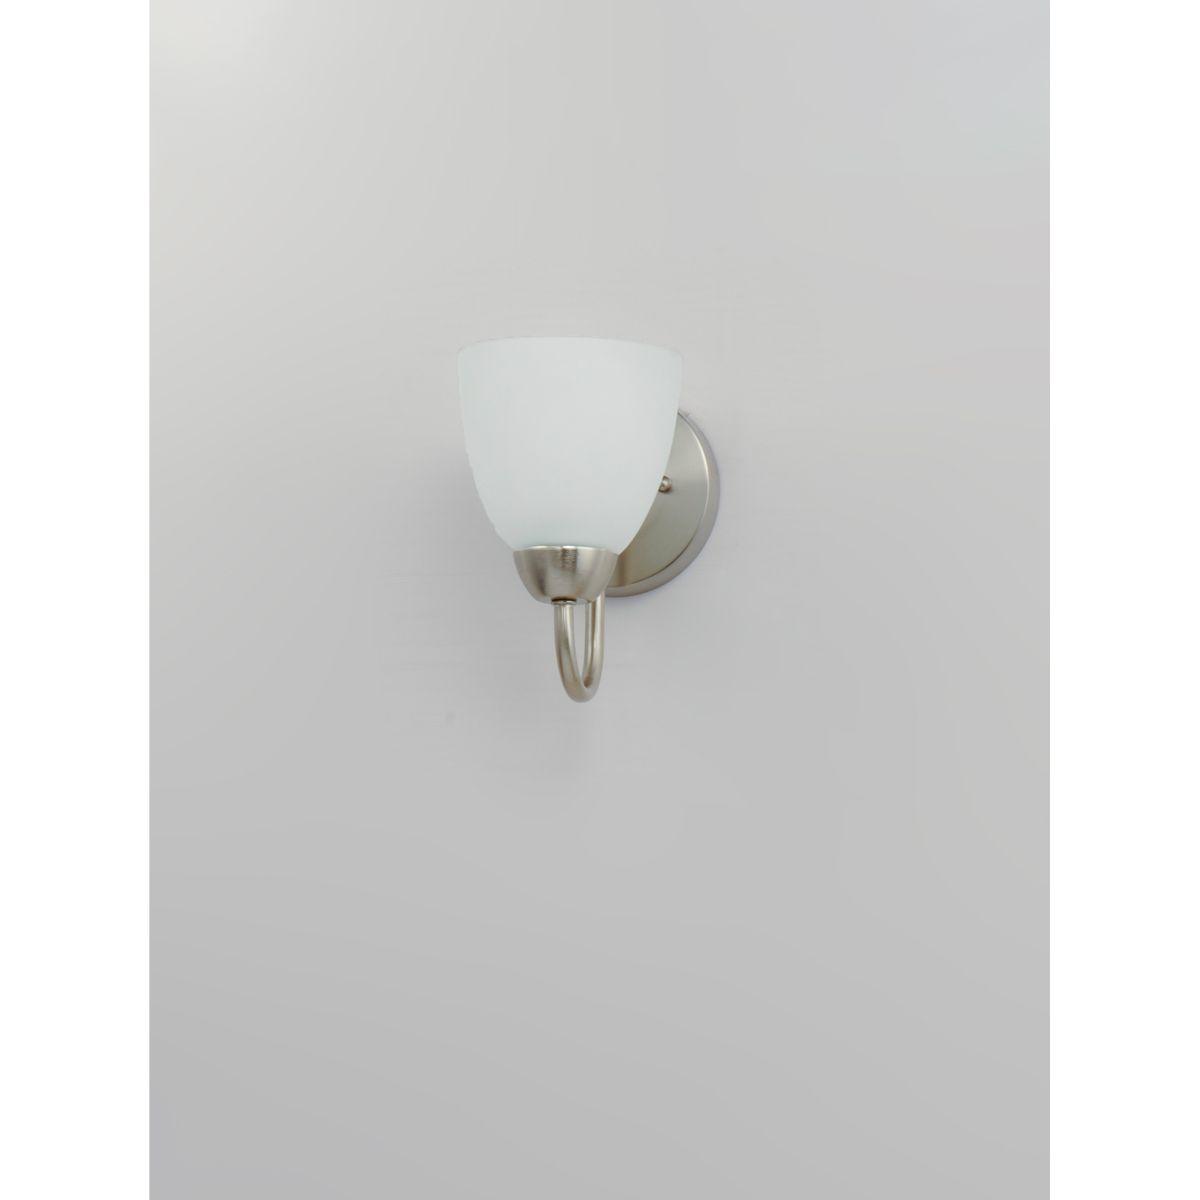 Axis 8 in. Armed Sconce Satin Nickel Finish